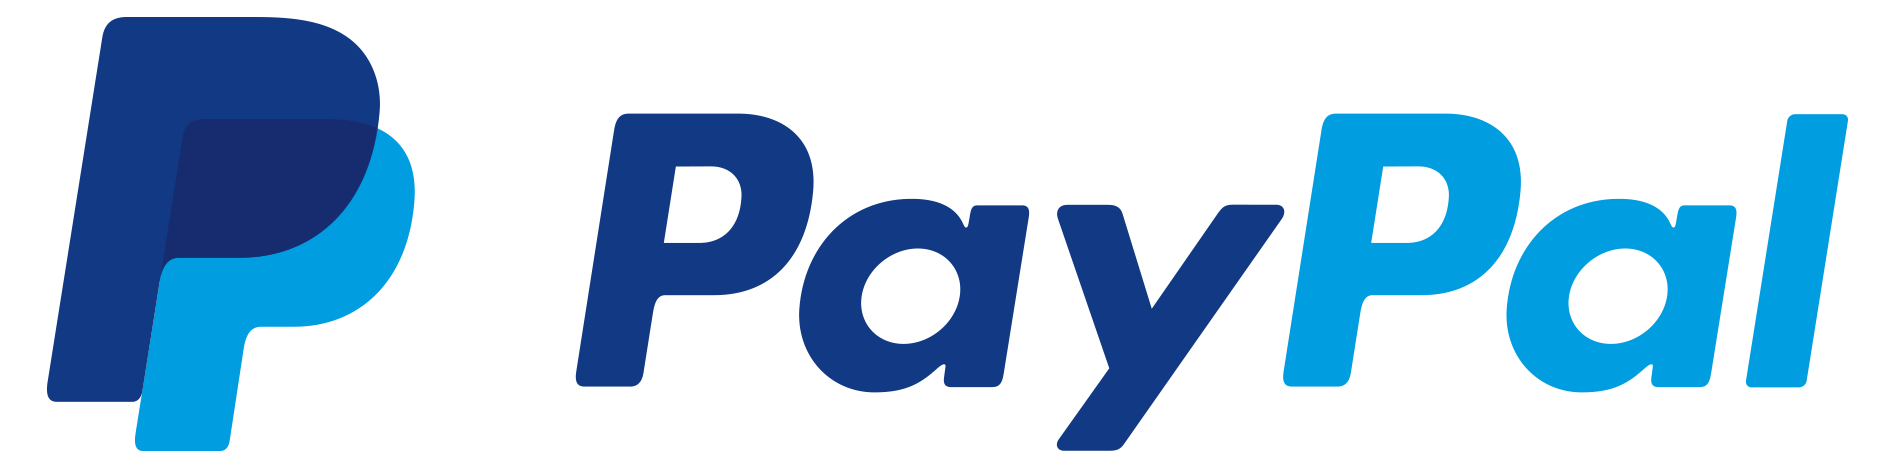 PayPal-expanded.png